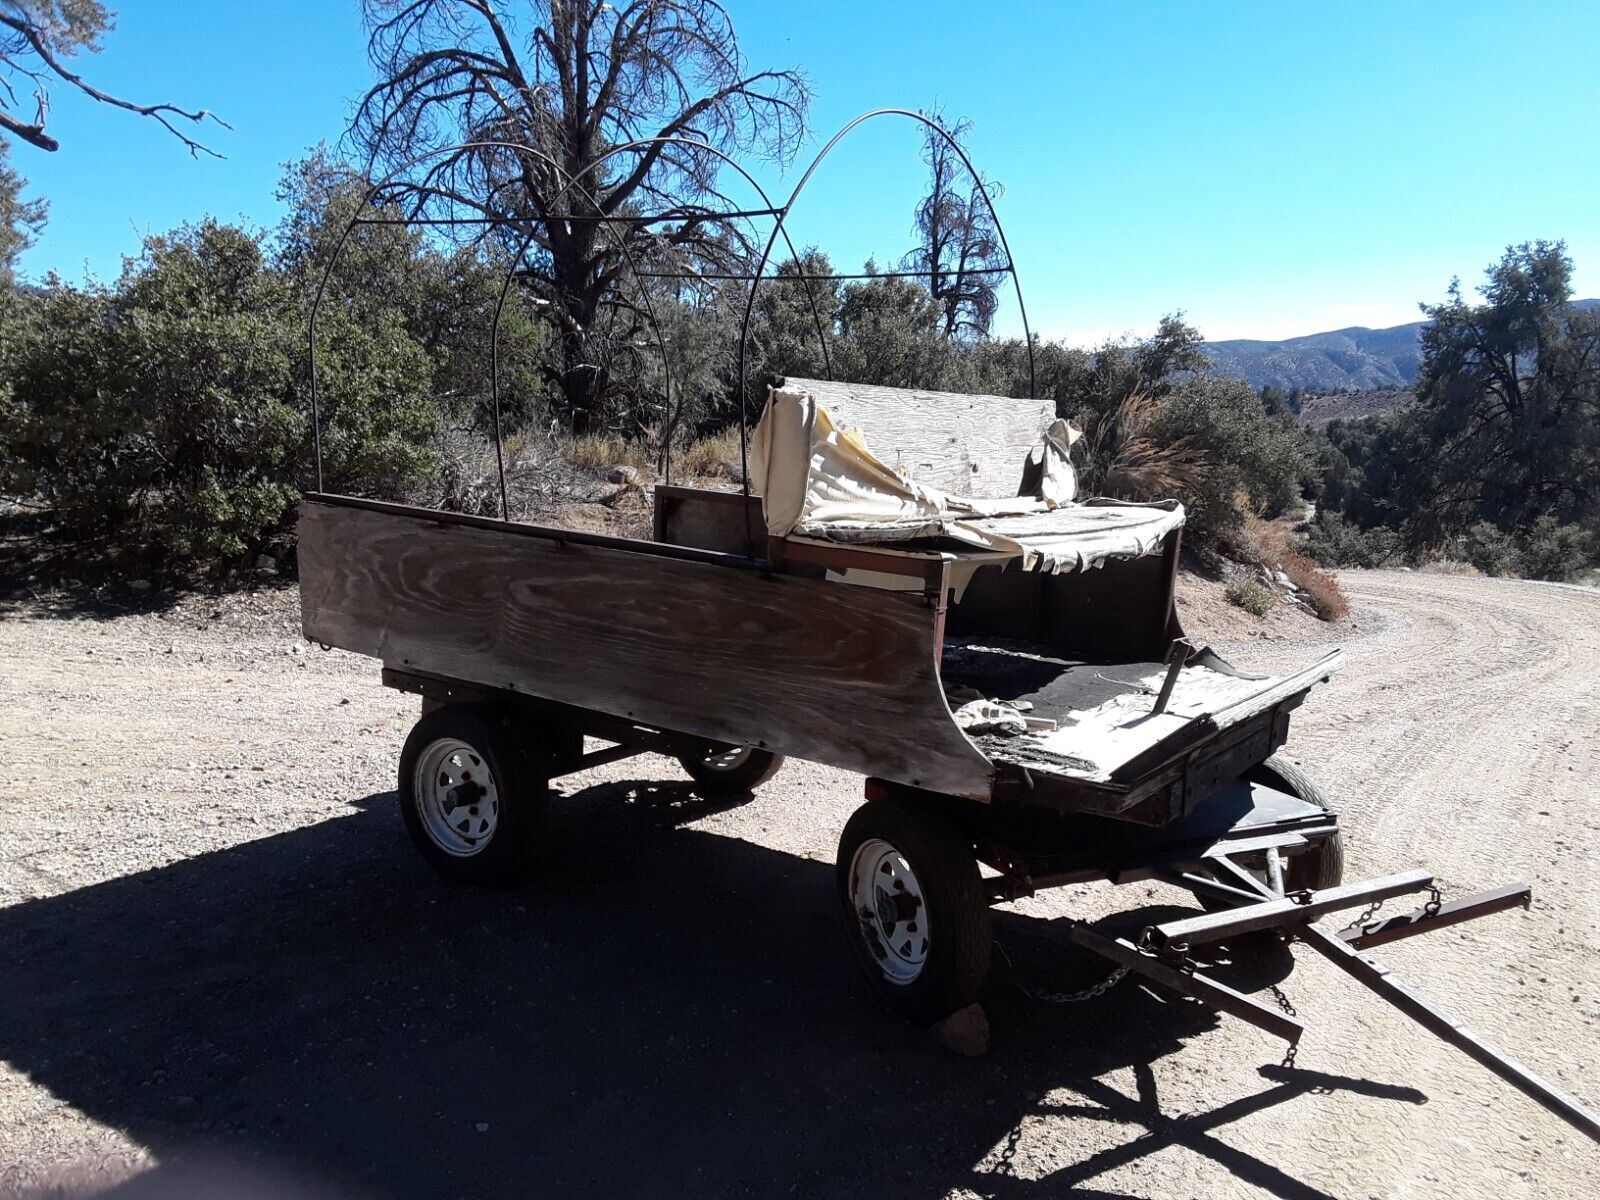 Horse Drawn Covered Wagon - Currently Set Up For Ponies To Pull